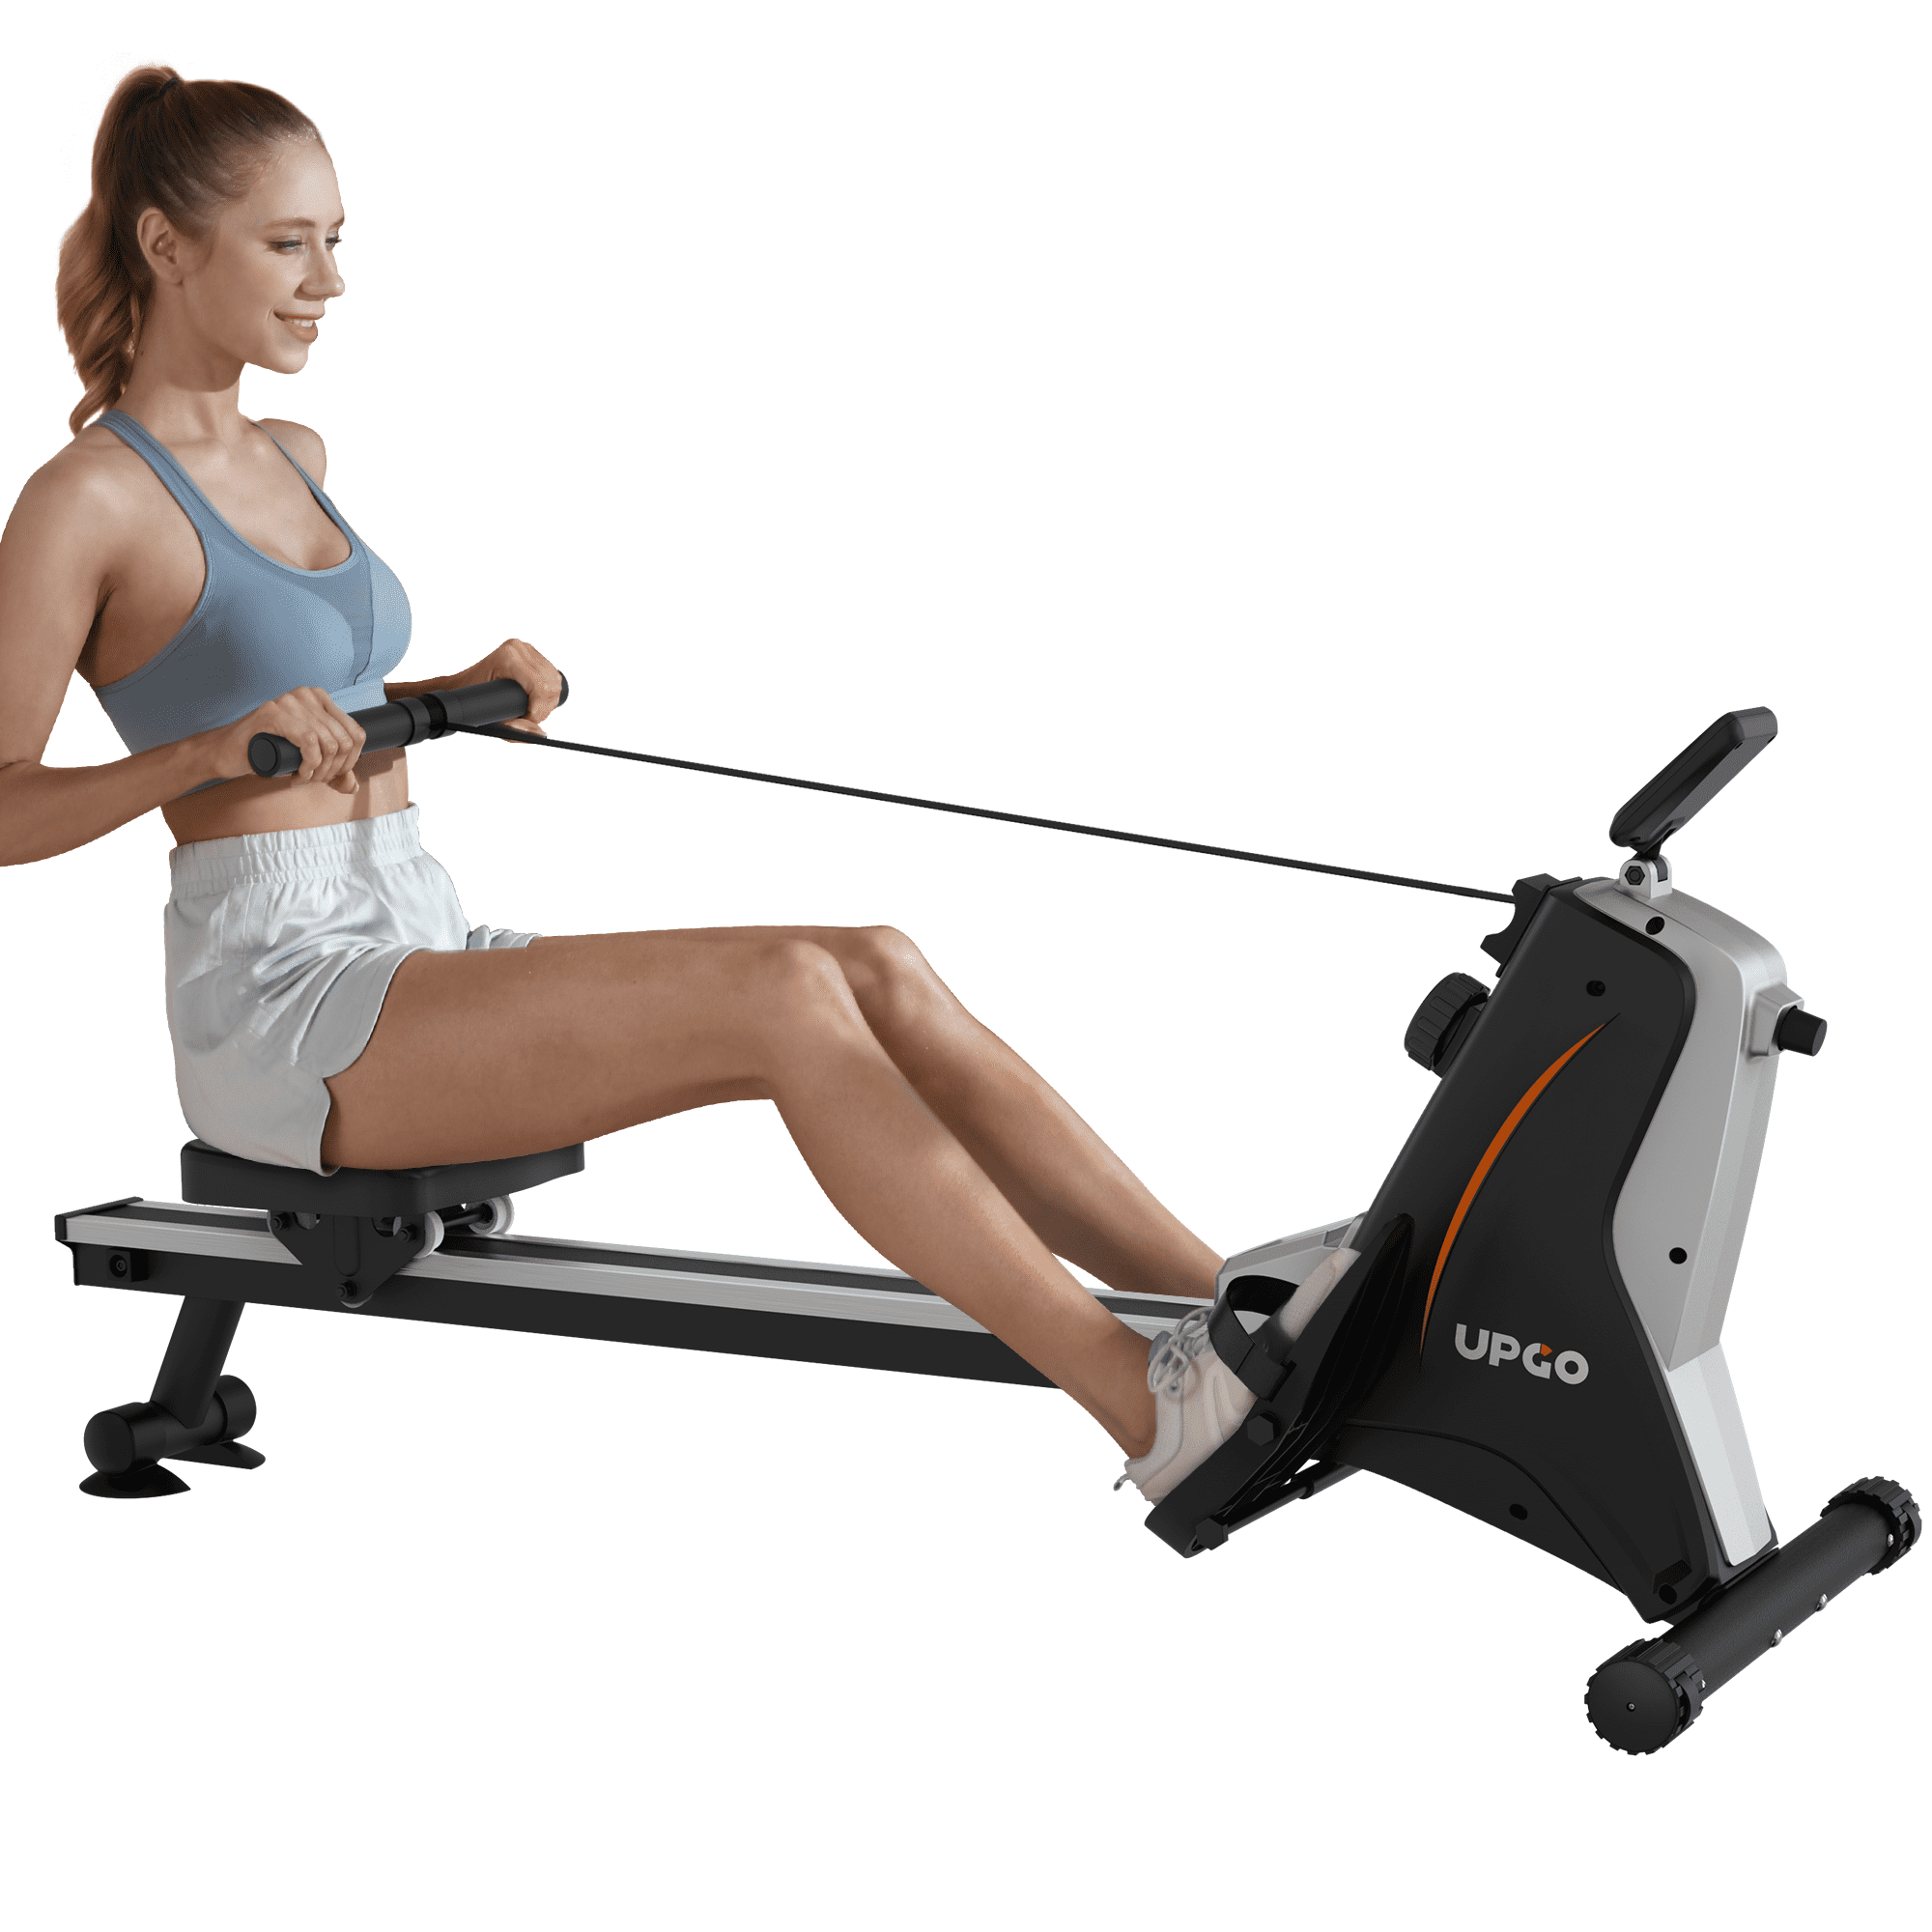 Upgo Rower Magnetic Rowing Machine For Home Indoor Foldable Rower With Level Adjustable Resistance Exercise Rower Ergonomic Seat LCD Monitor forum.iktva.sa